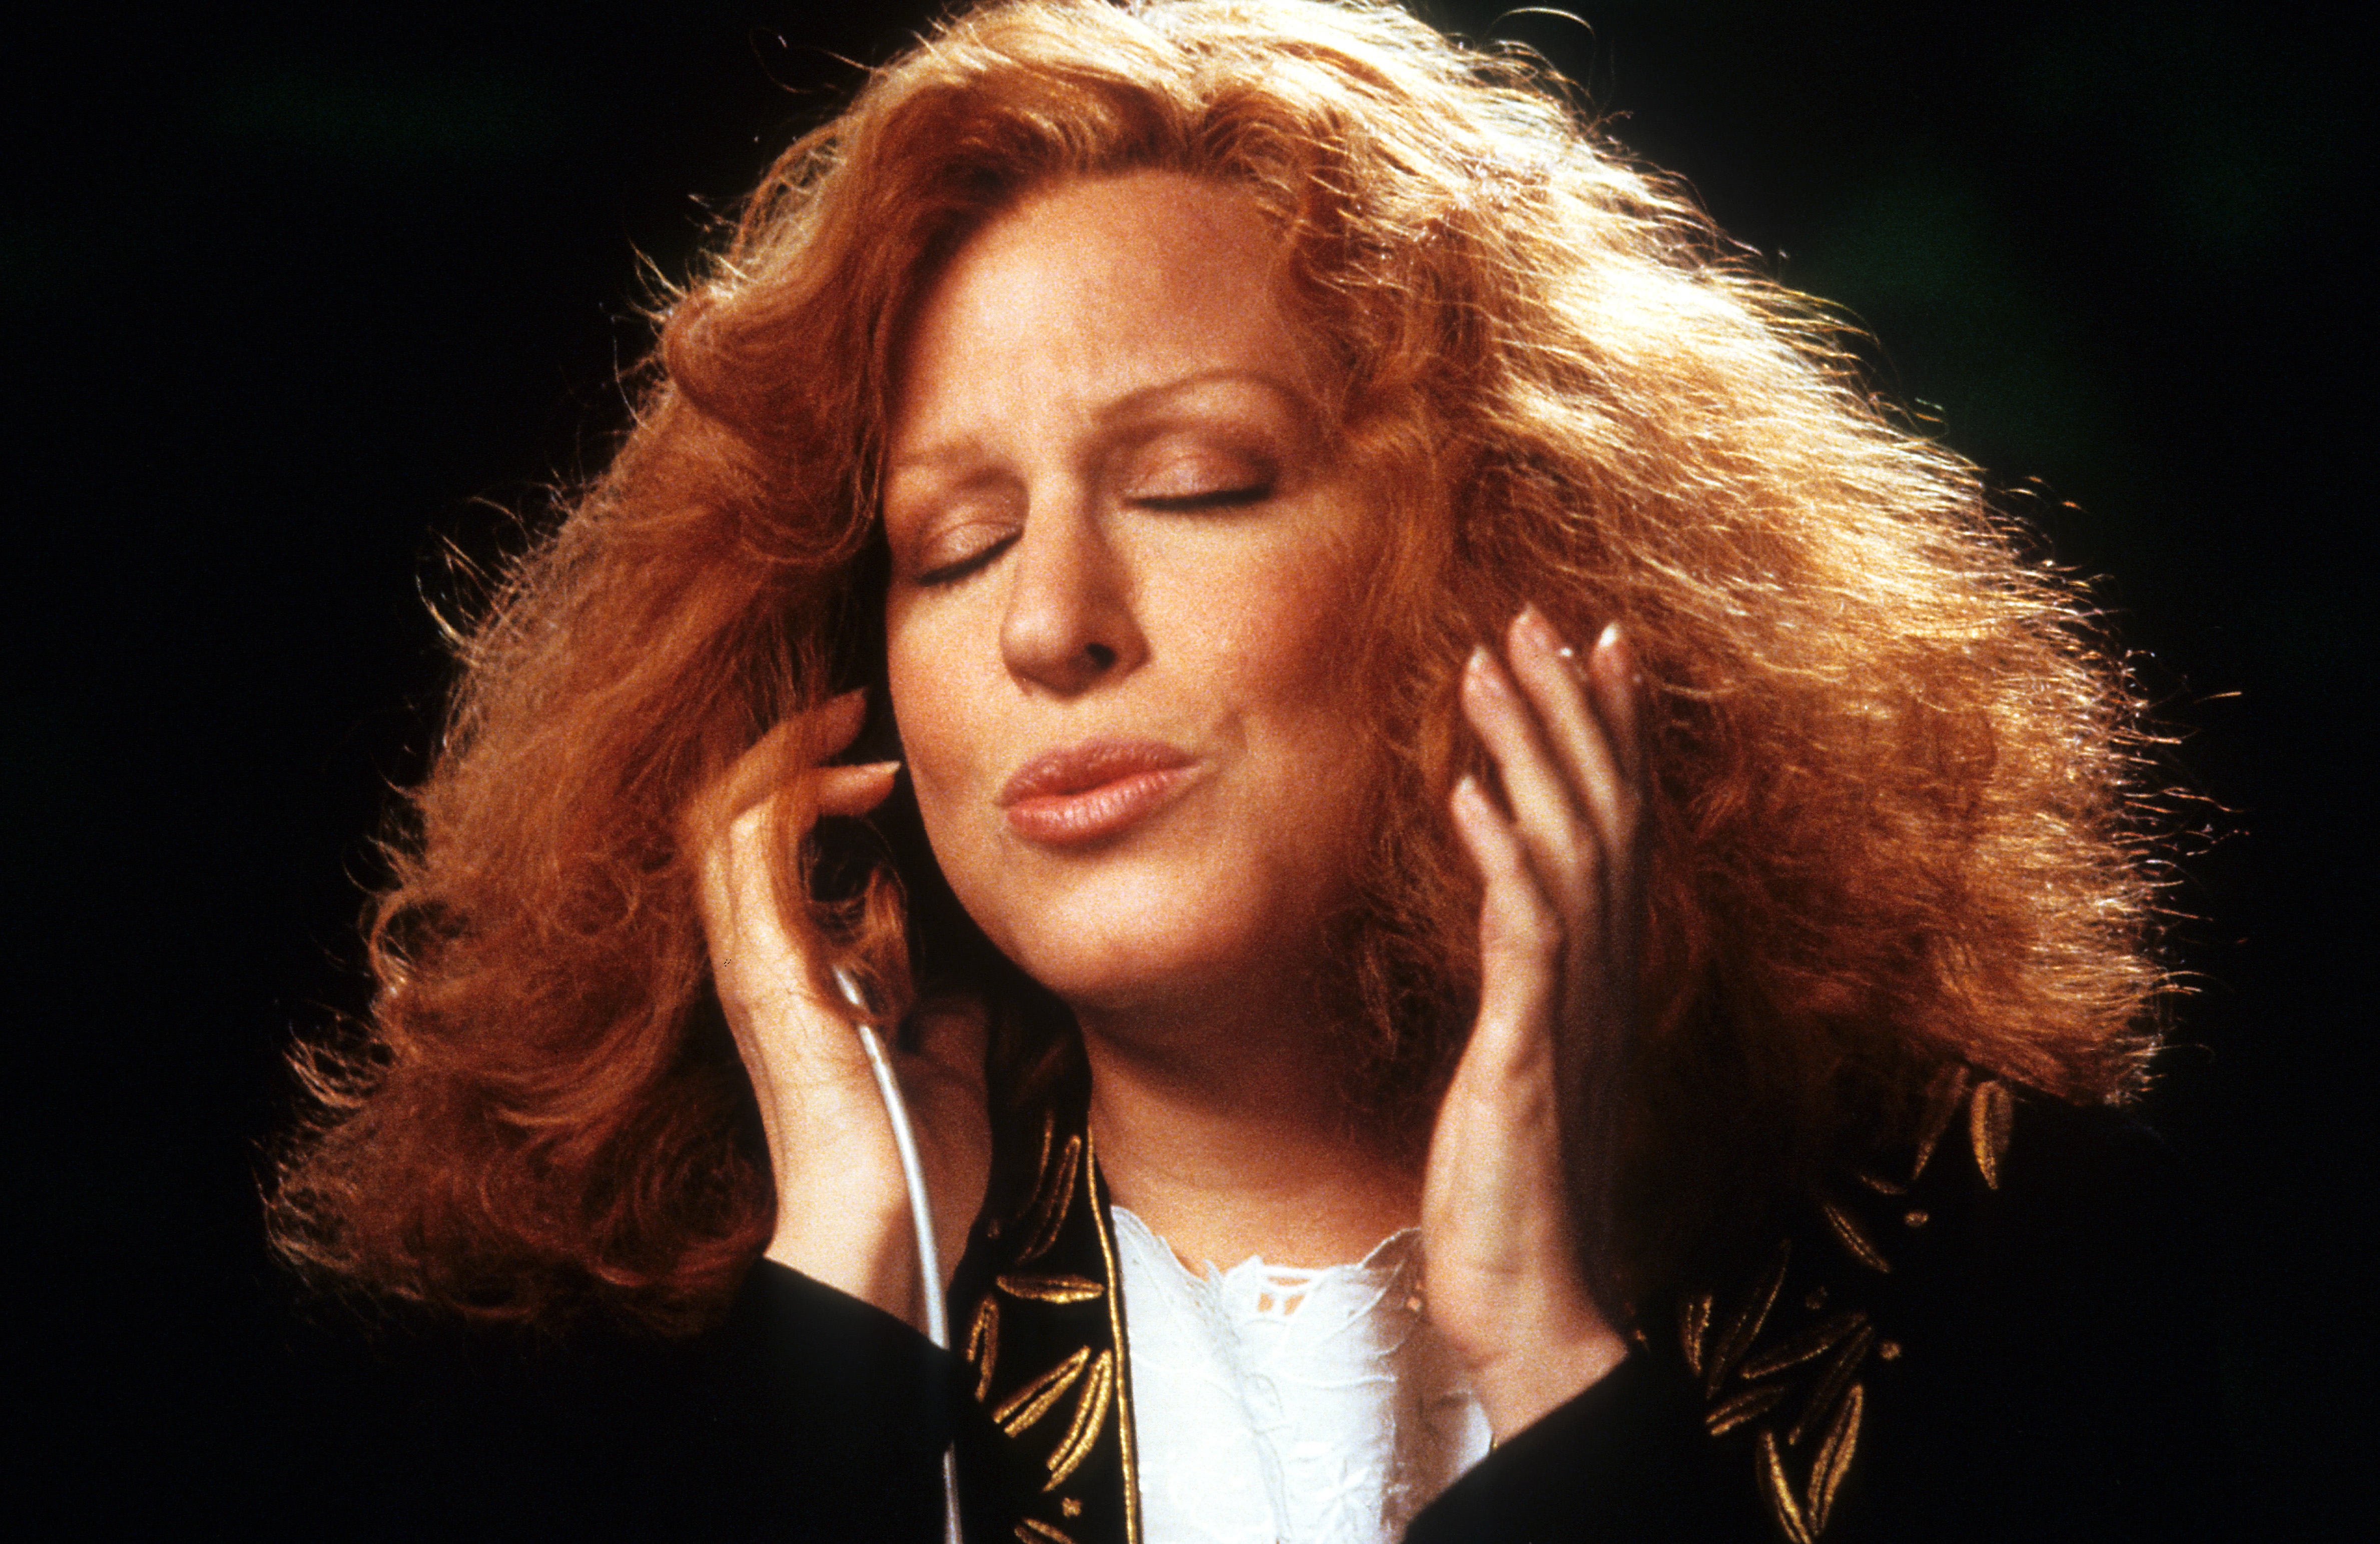 Bette Midler in a scene from the film 'Beaches', 1988 | Source: Getty Images